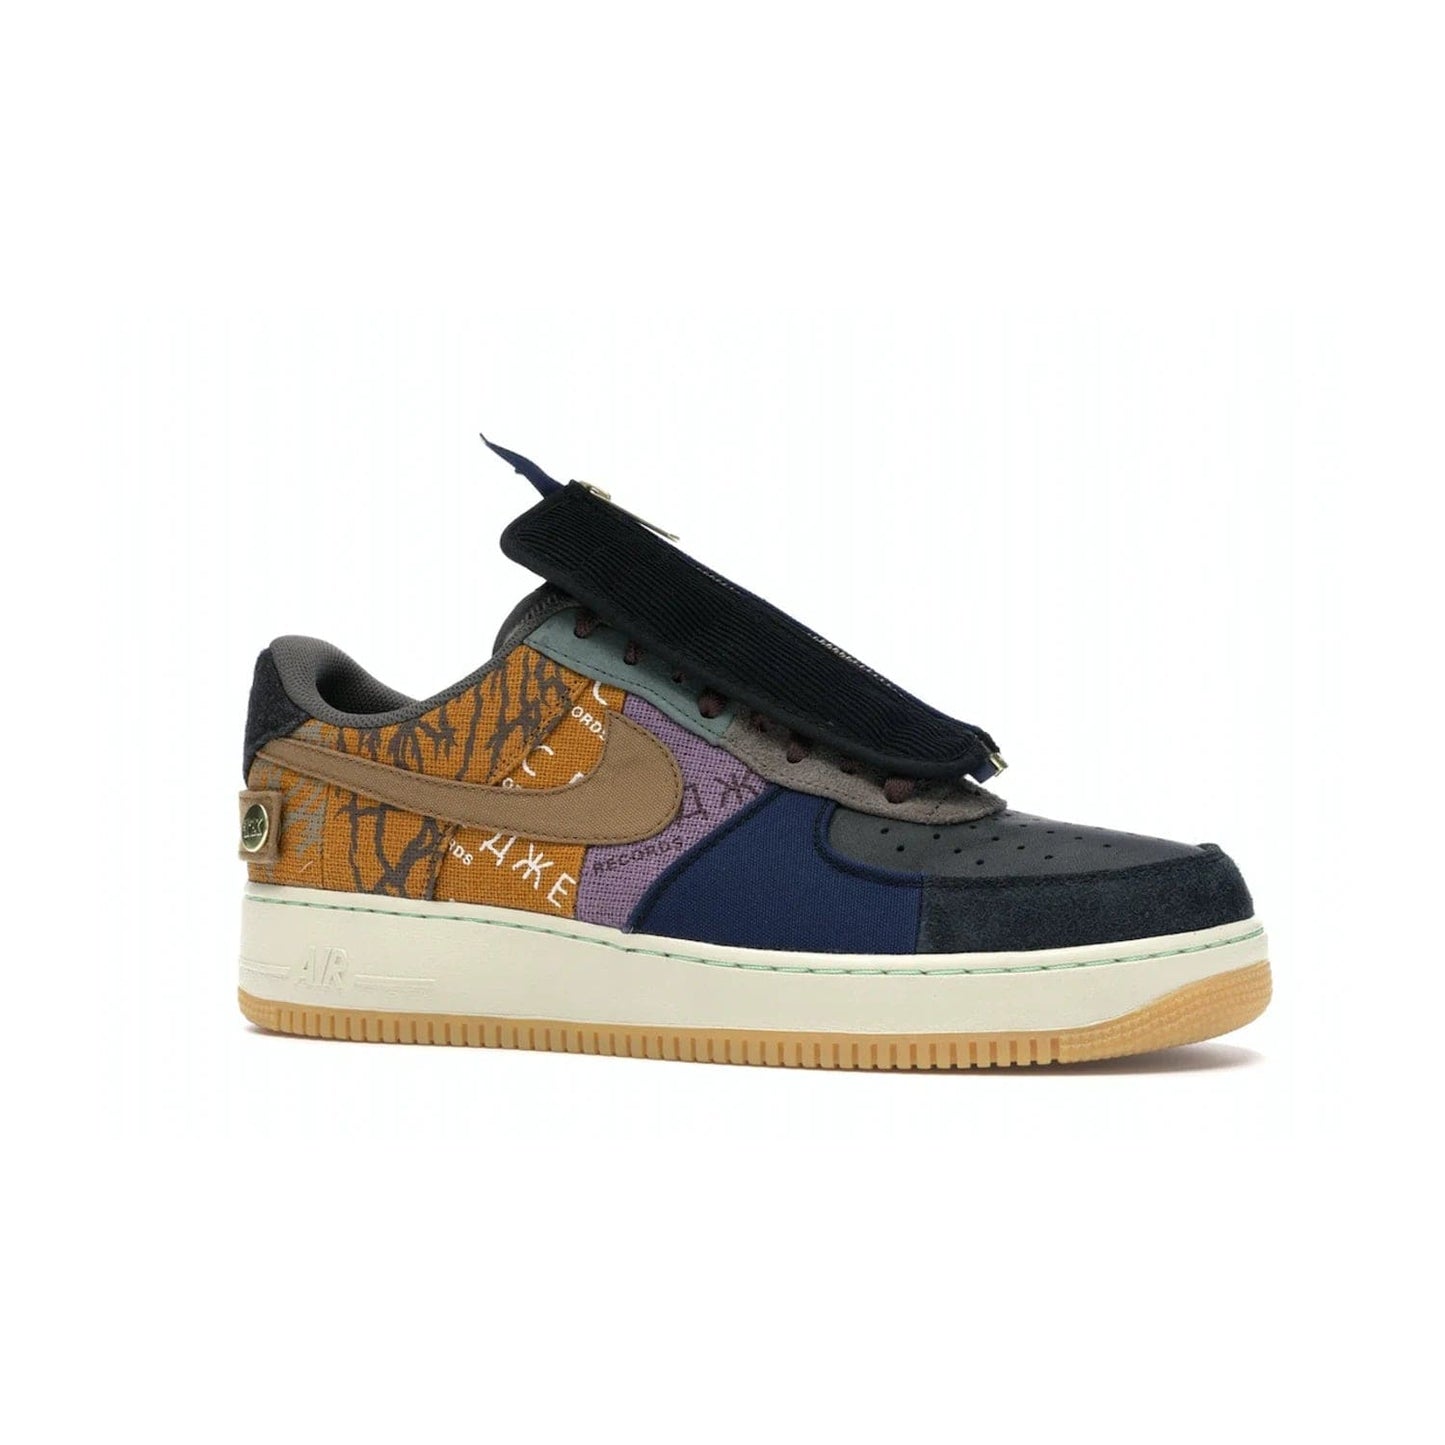 Nike Air Force 1 Low Travis Scott Cactus Jack - Image 3 - Only at www.BallersClubKickz.com - The Nike Air Force 1 Low Travis Scott Cactus Jack features a unique, multi-colored patchwork upper with muted bronze and fossil accents. Includes detachable lace cover, brass zipper, and Cactus Jack insignias. A sail midsole, gum rubber outsole complete the eye-catching design. Perfect for comfort and style with unexpected touches of detail.